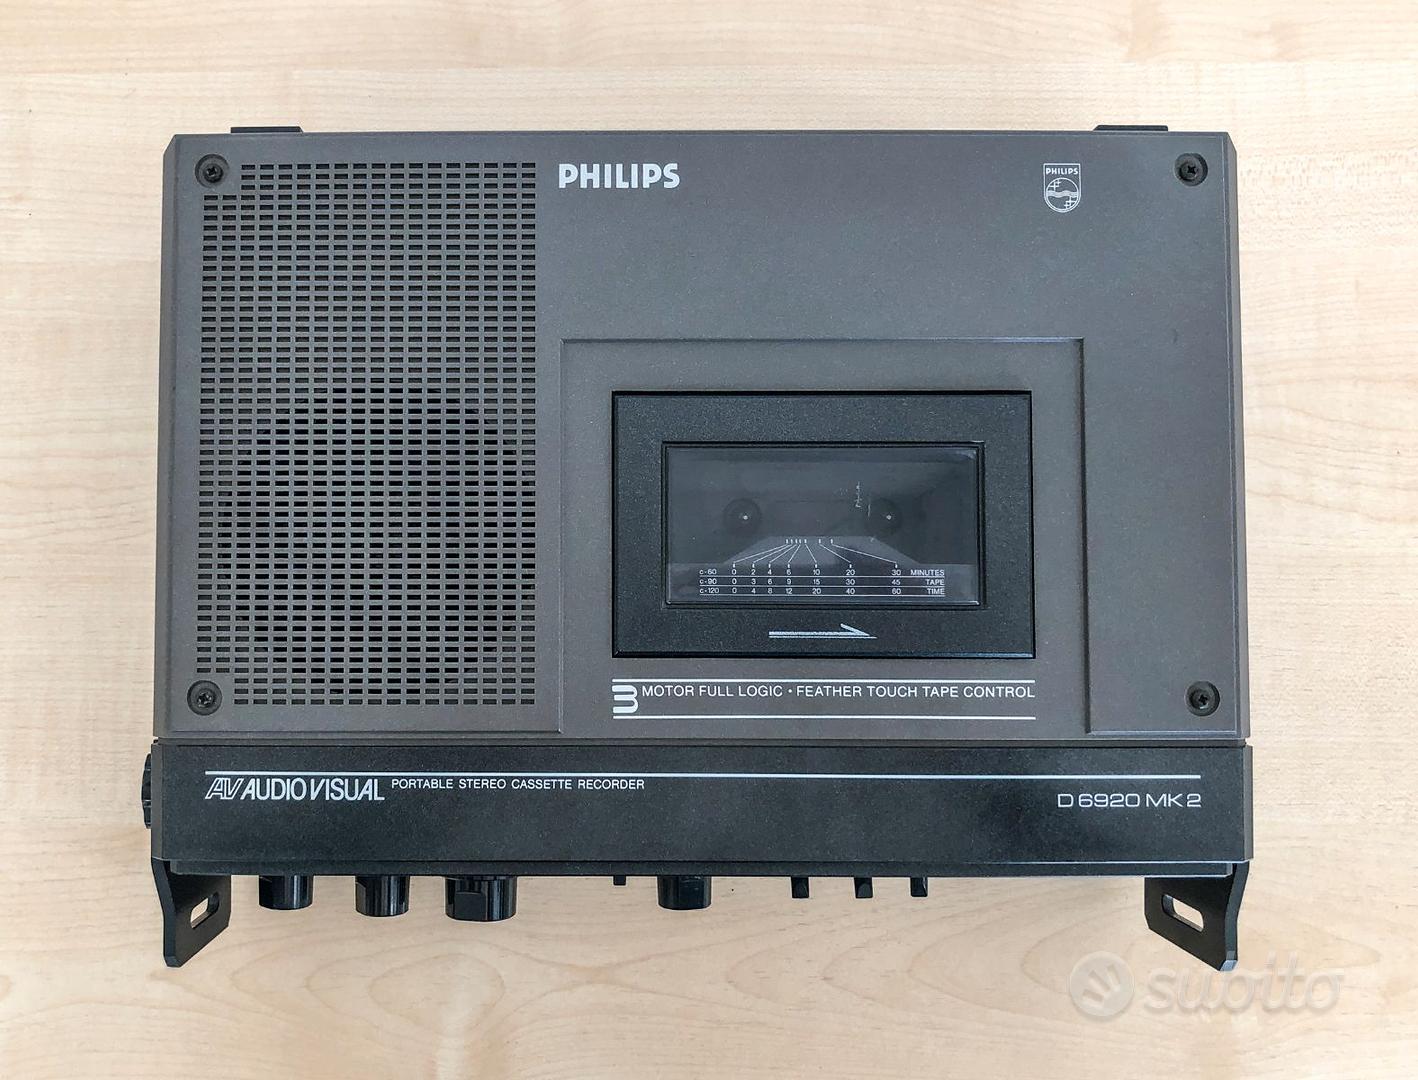 PHILIPS D 6920 MK2 PORTABLE STEREO RECORDER - Audio/Video In